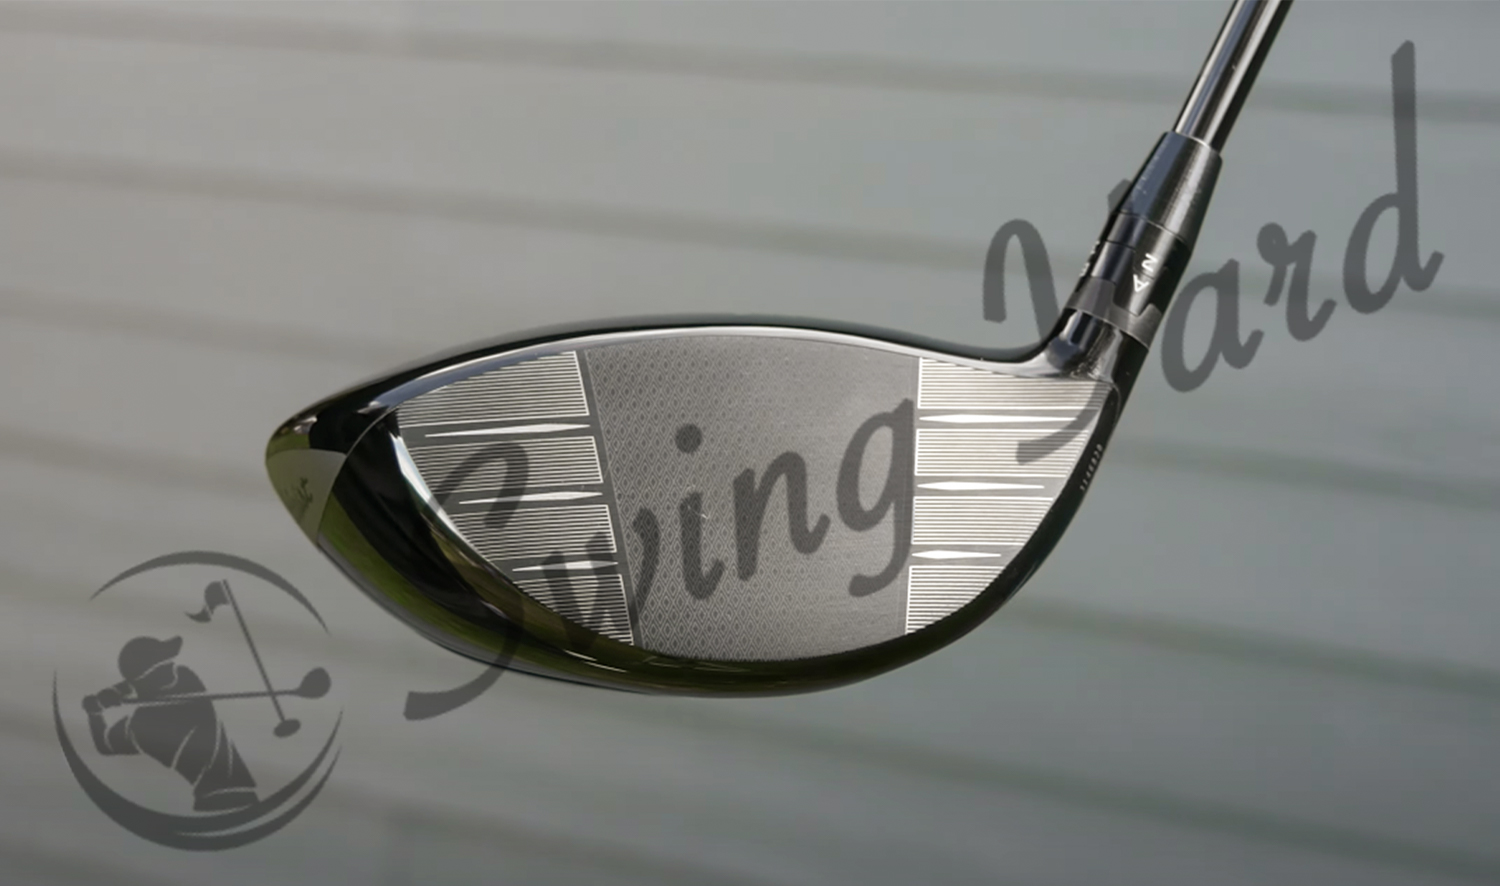 Sleek looking club face of the Titleist TSR1 driver